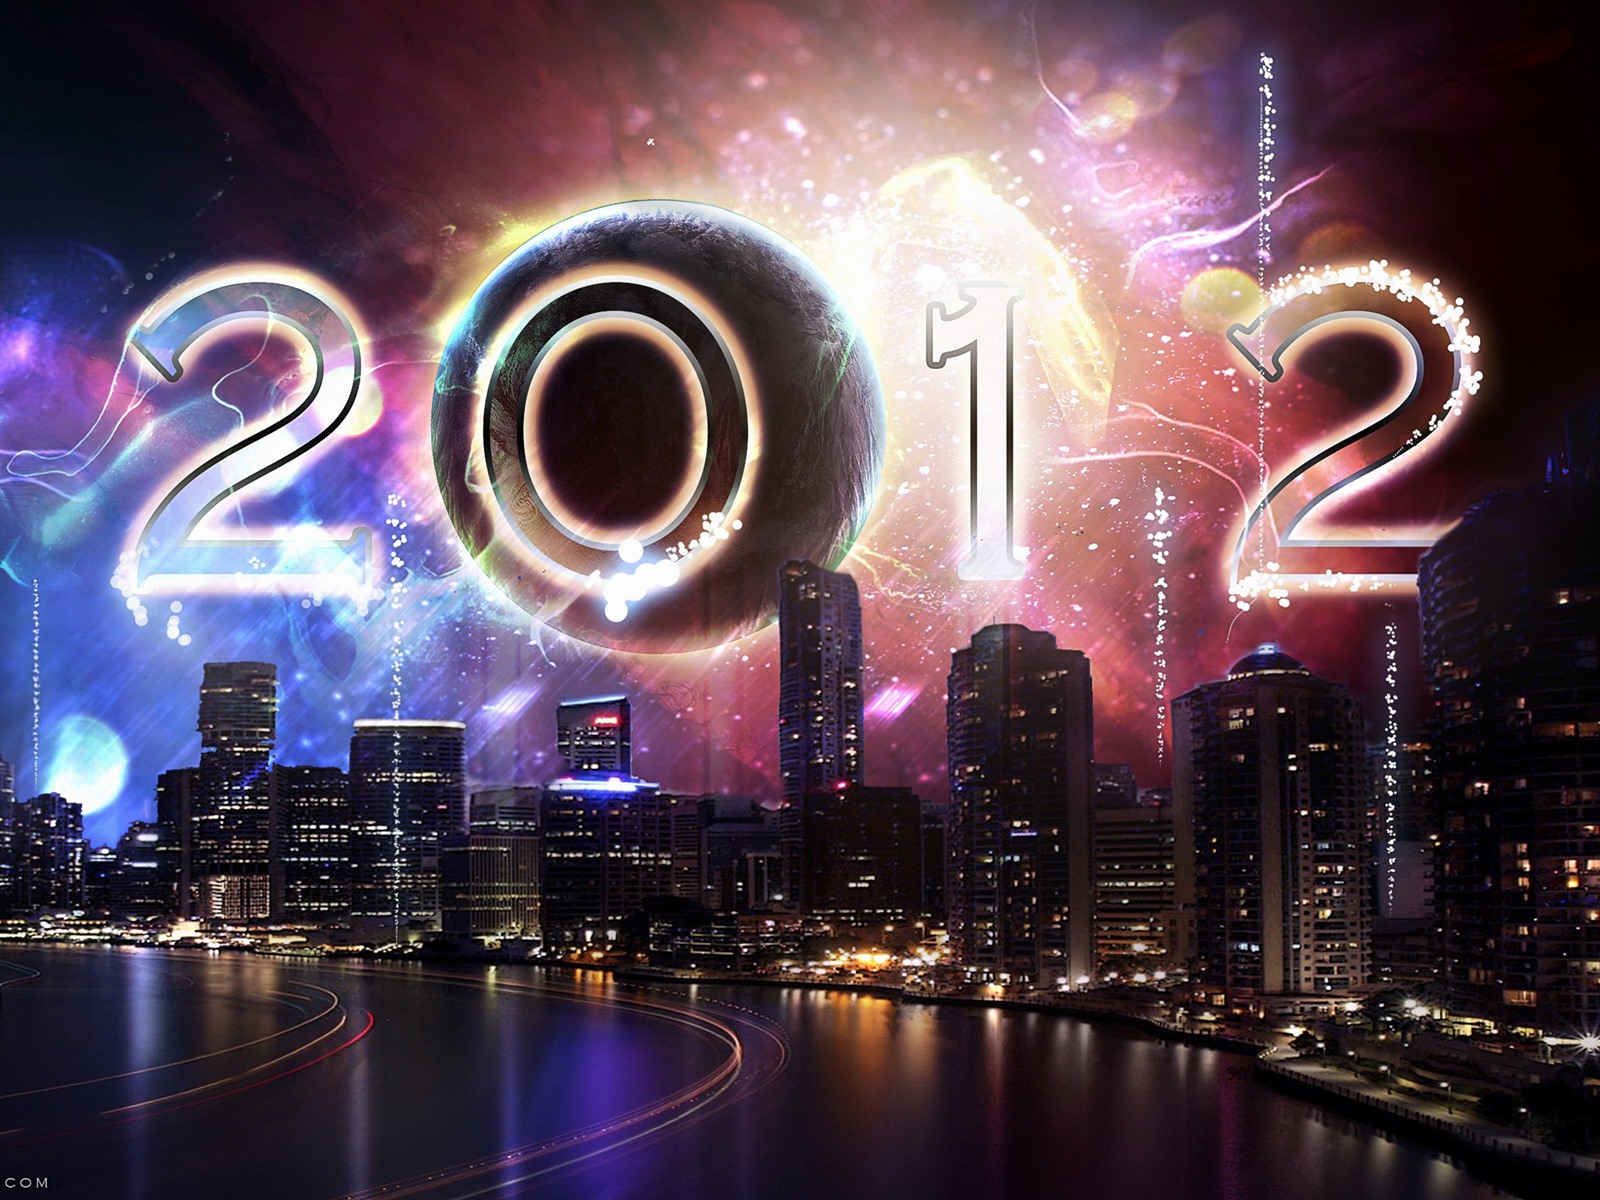 2012 New Year wallpapers (1) #1 - 1600x1200